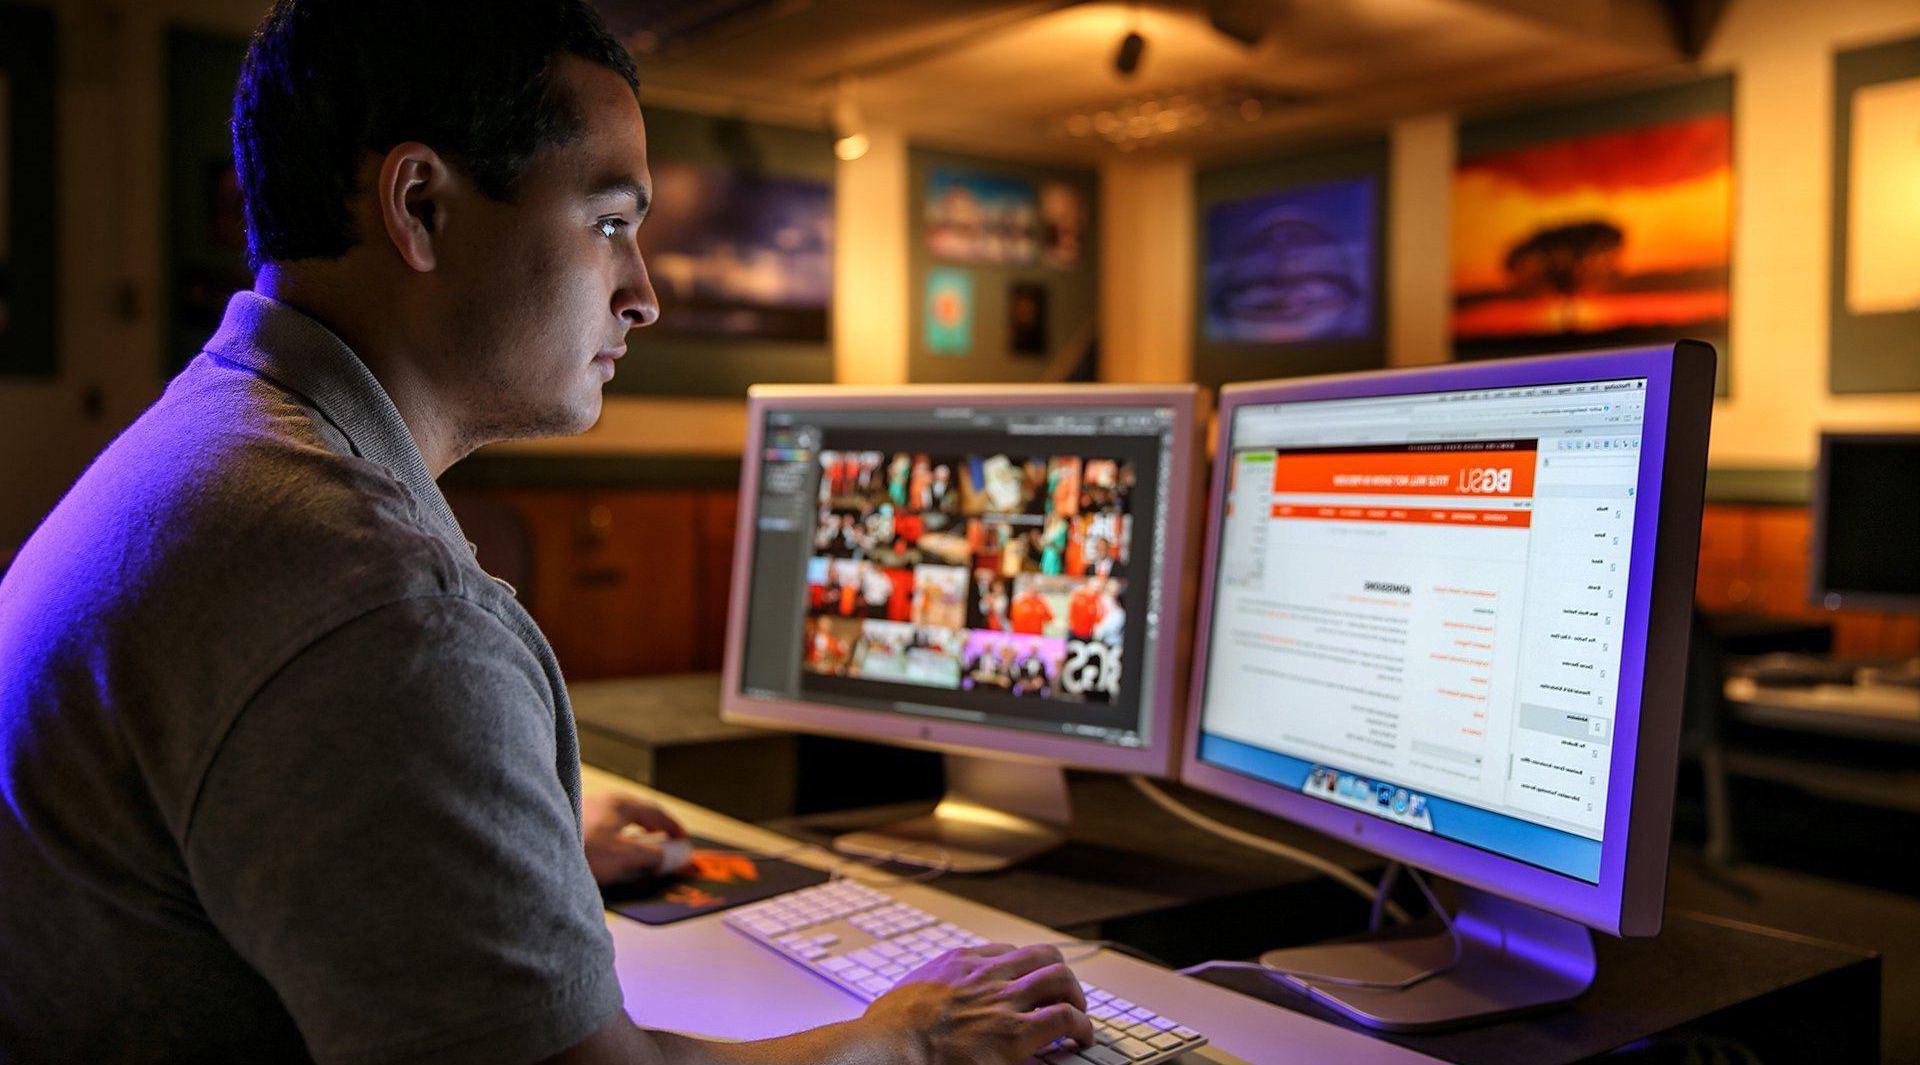 A male VCT student at BGSU sits in front of two computer monitors 和 works on the BGSU website.